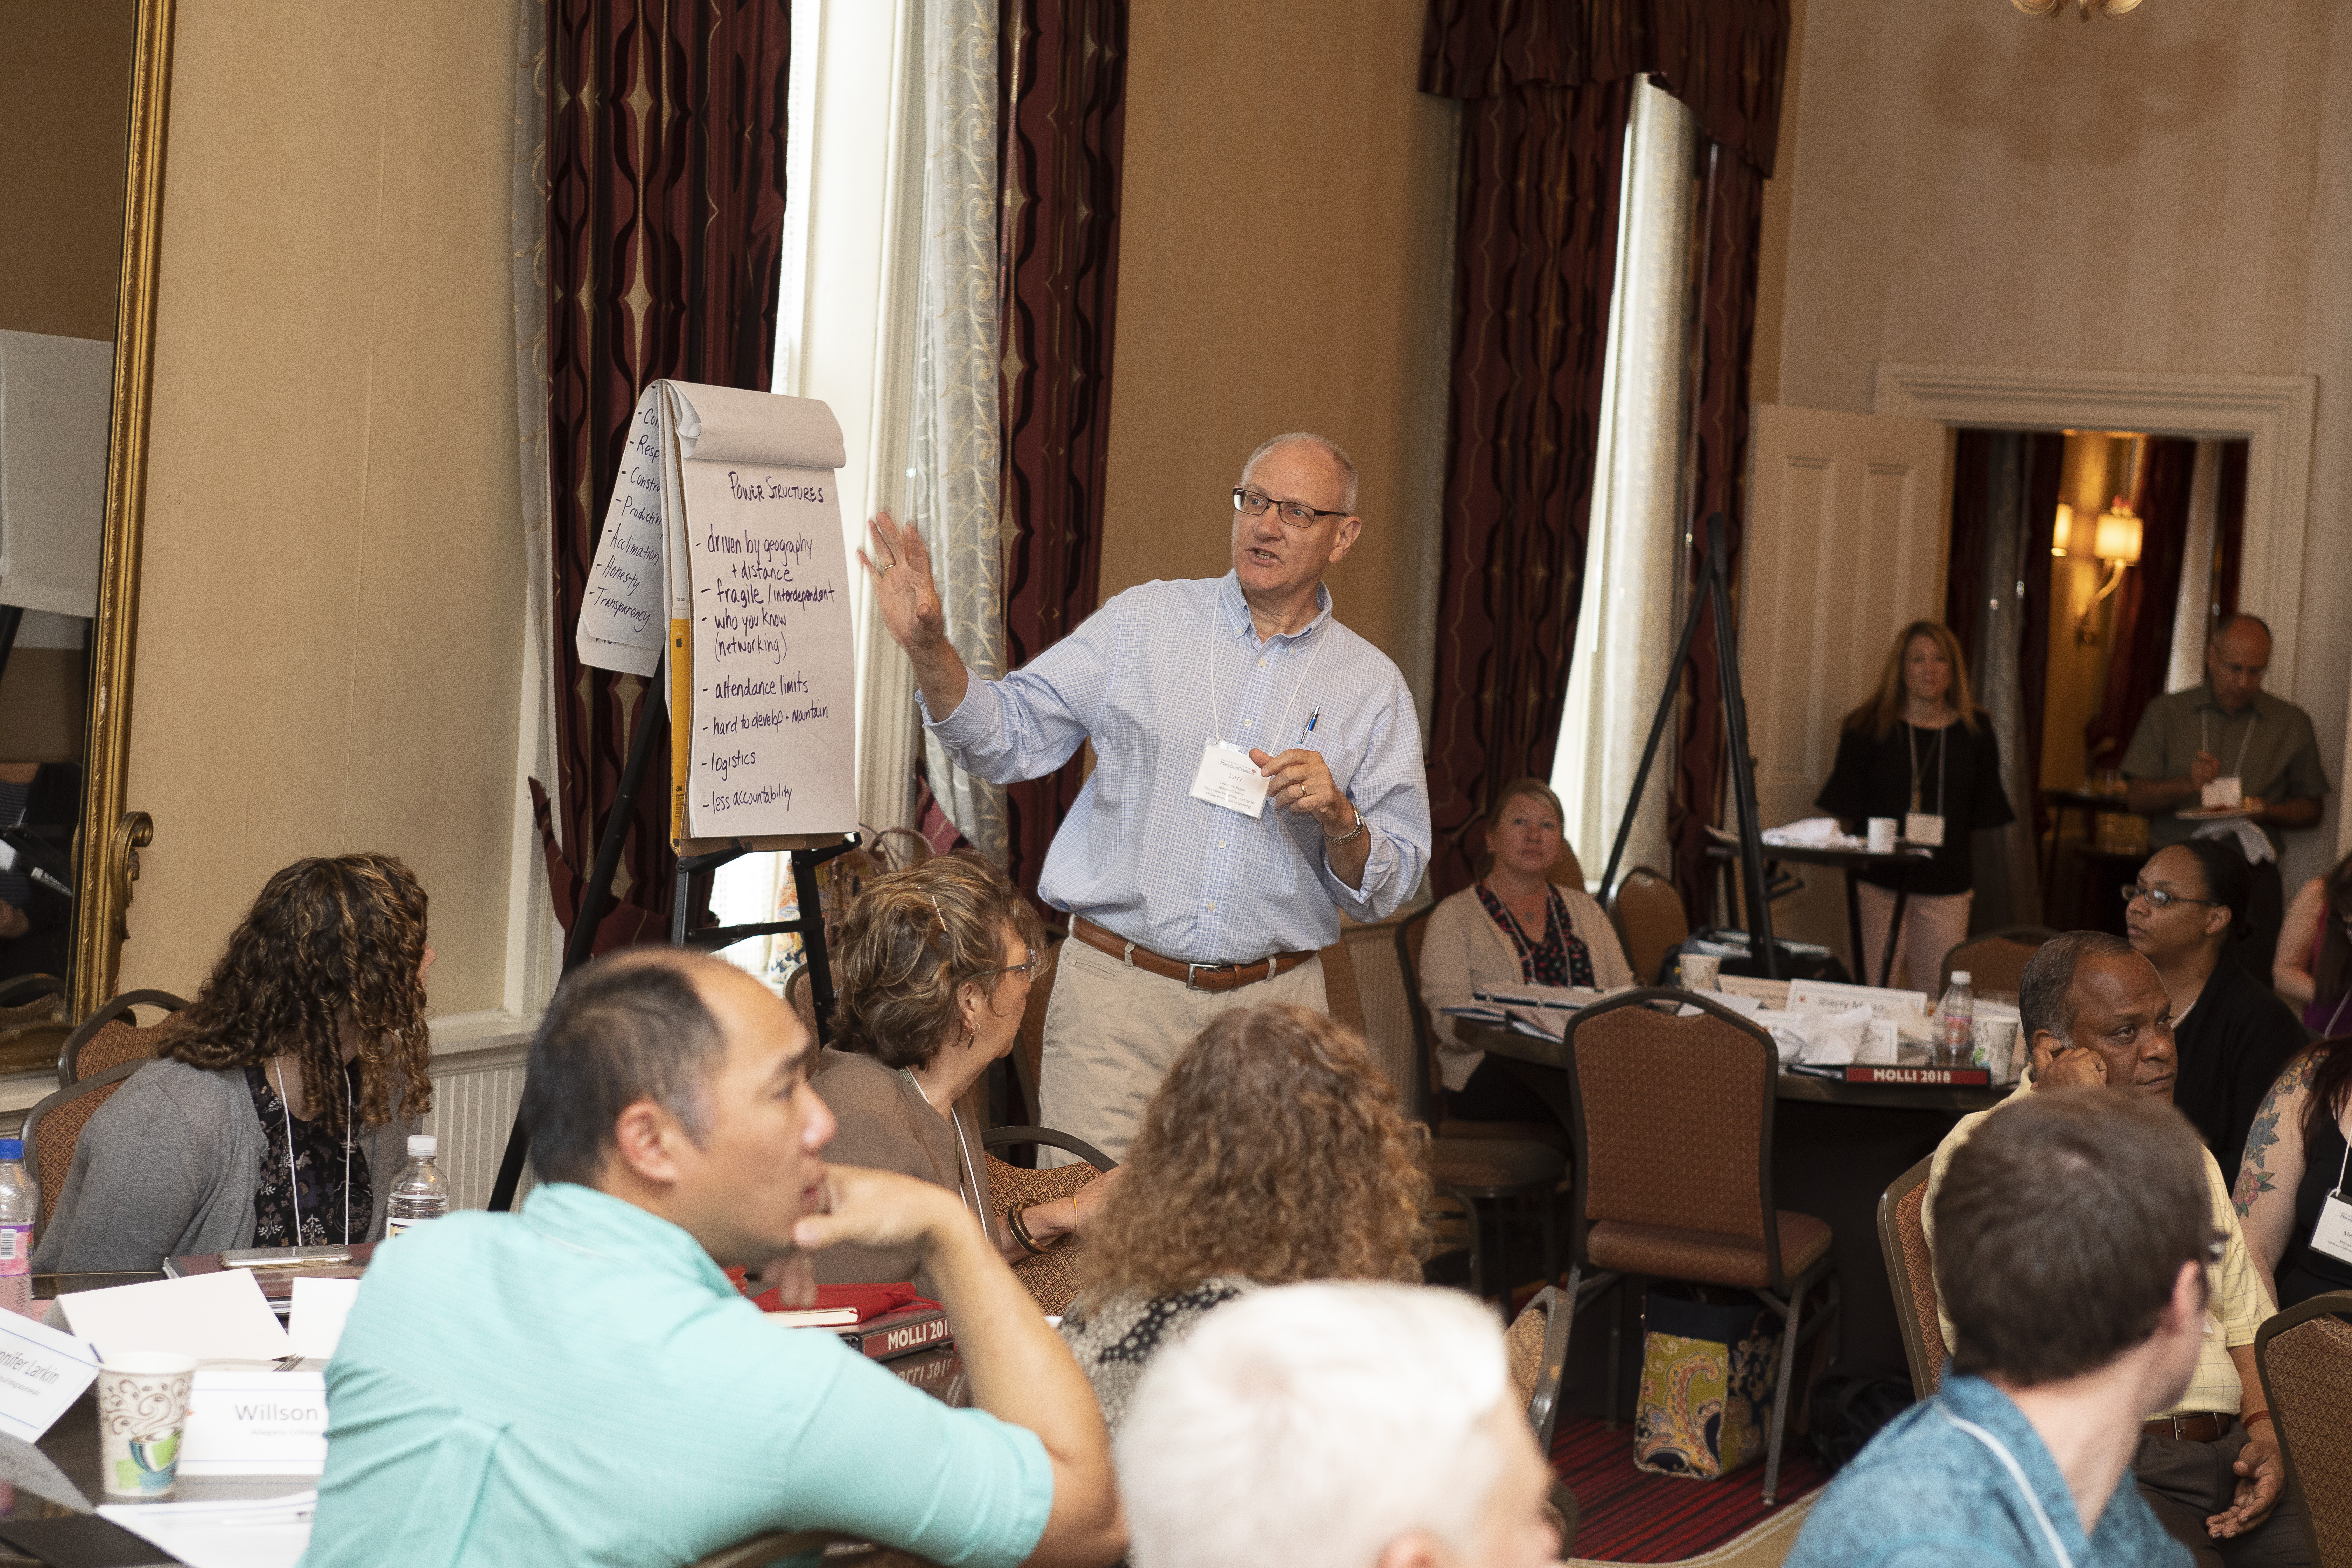 Participants in the 2018 institute presentation. Several individuals sit around round tables and one man presents from a paper flipchart with text written on it.